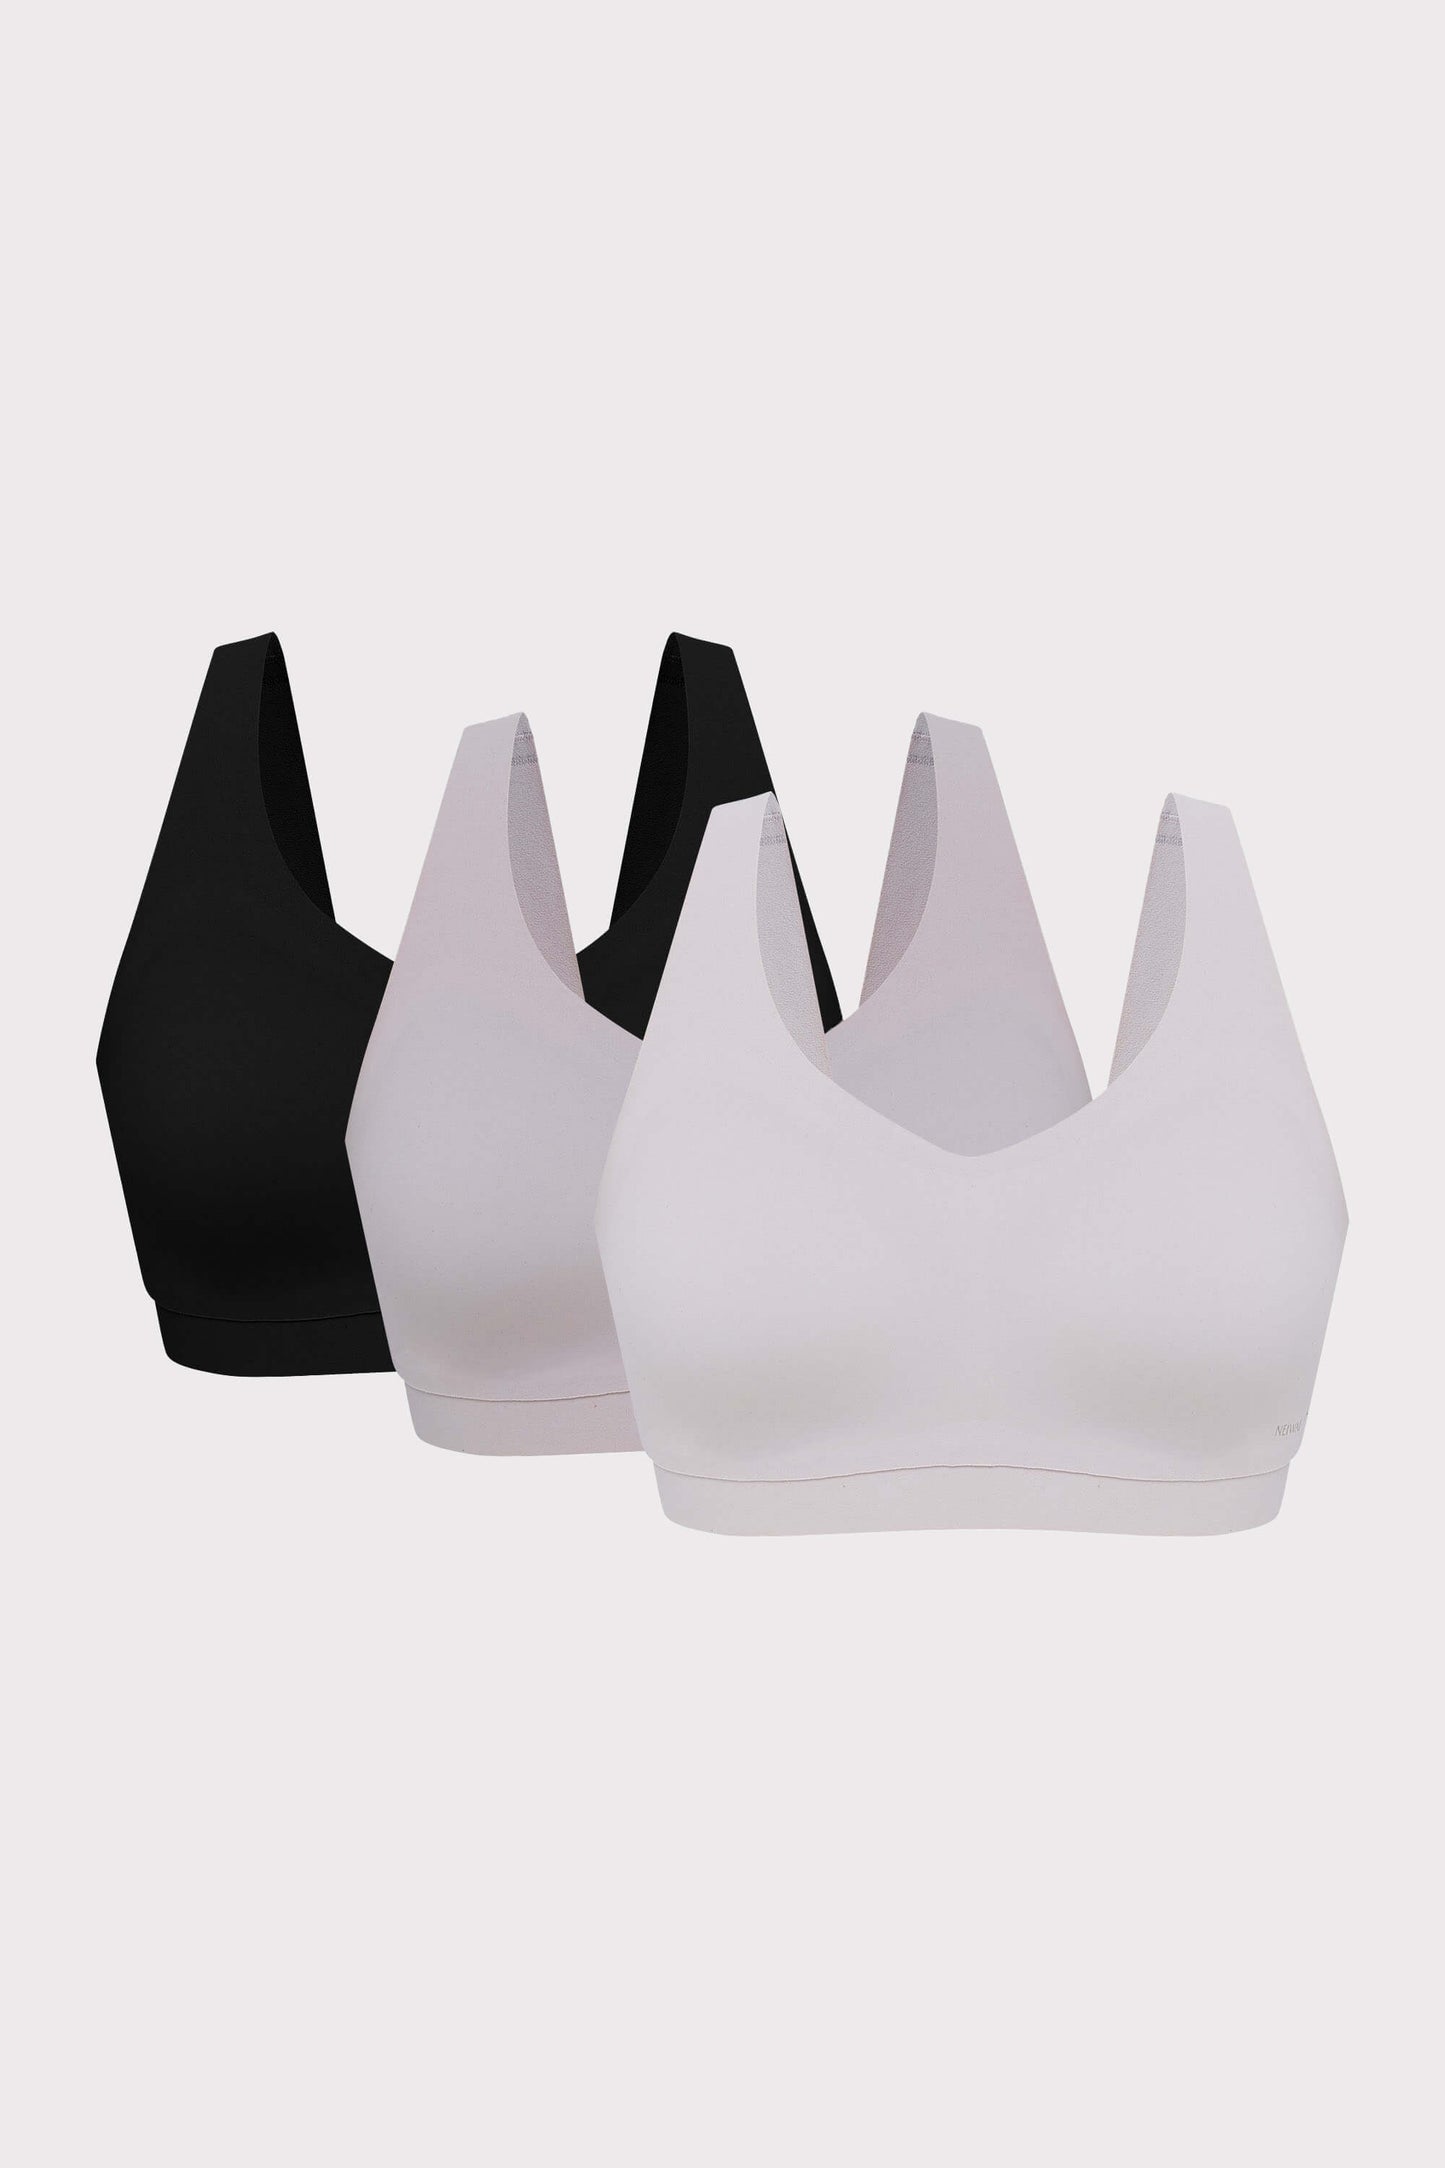 3 pack of bra include black, grey and light purple